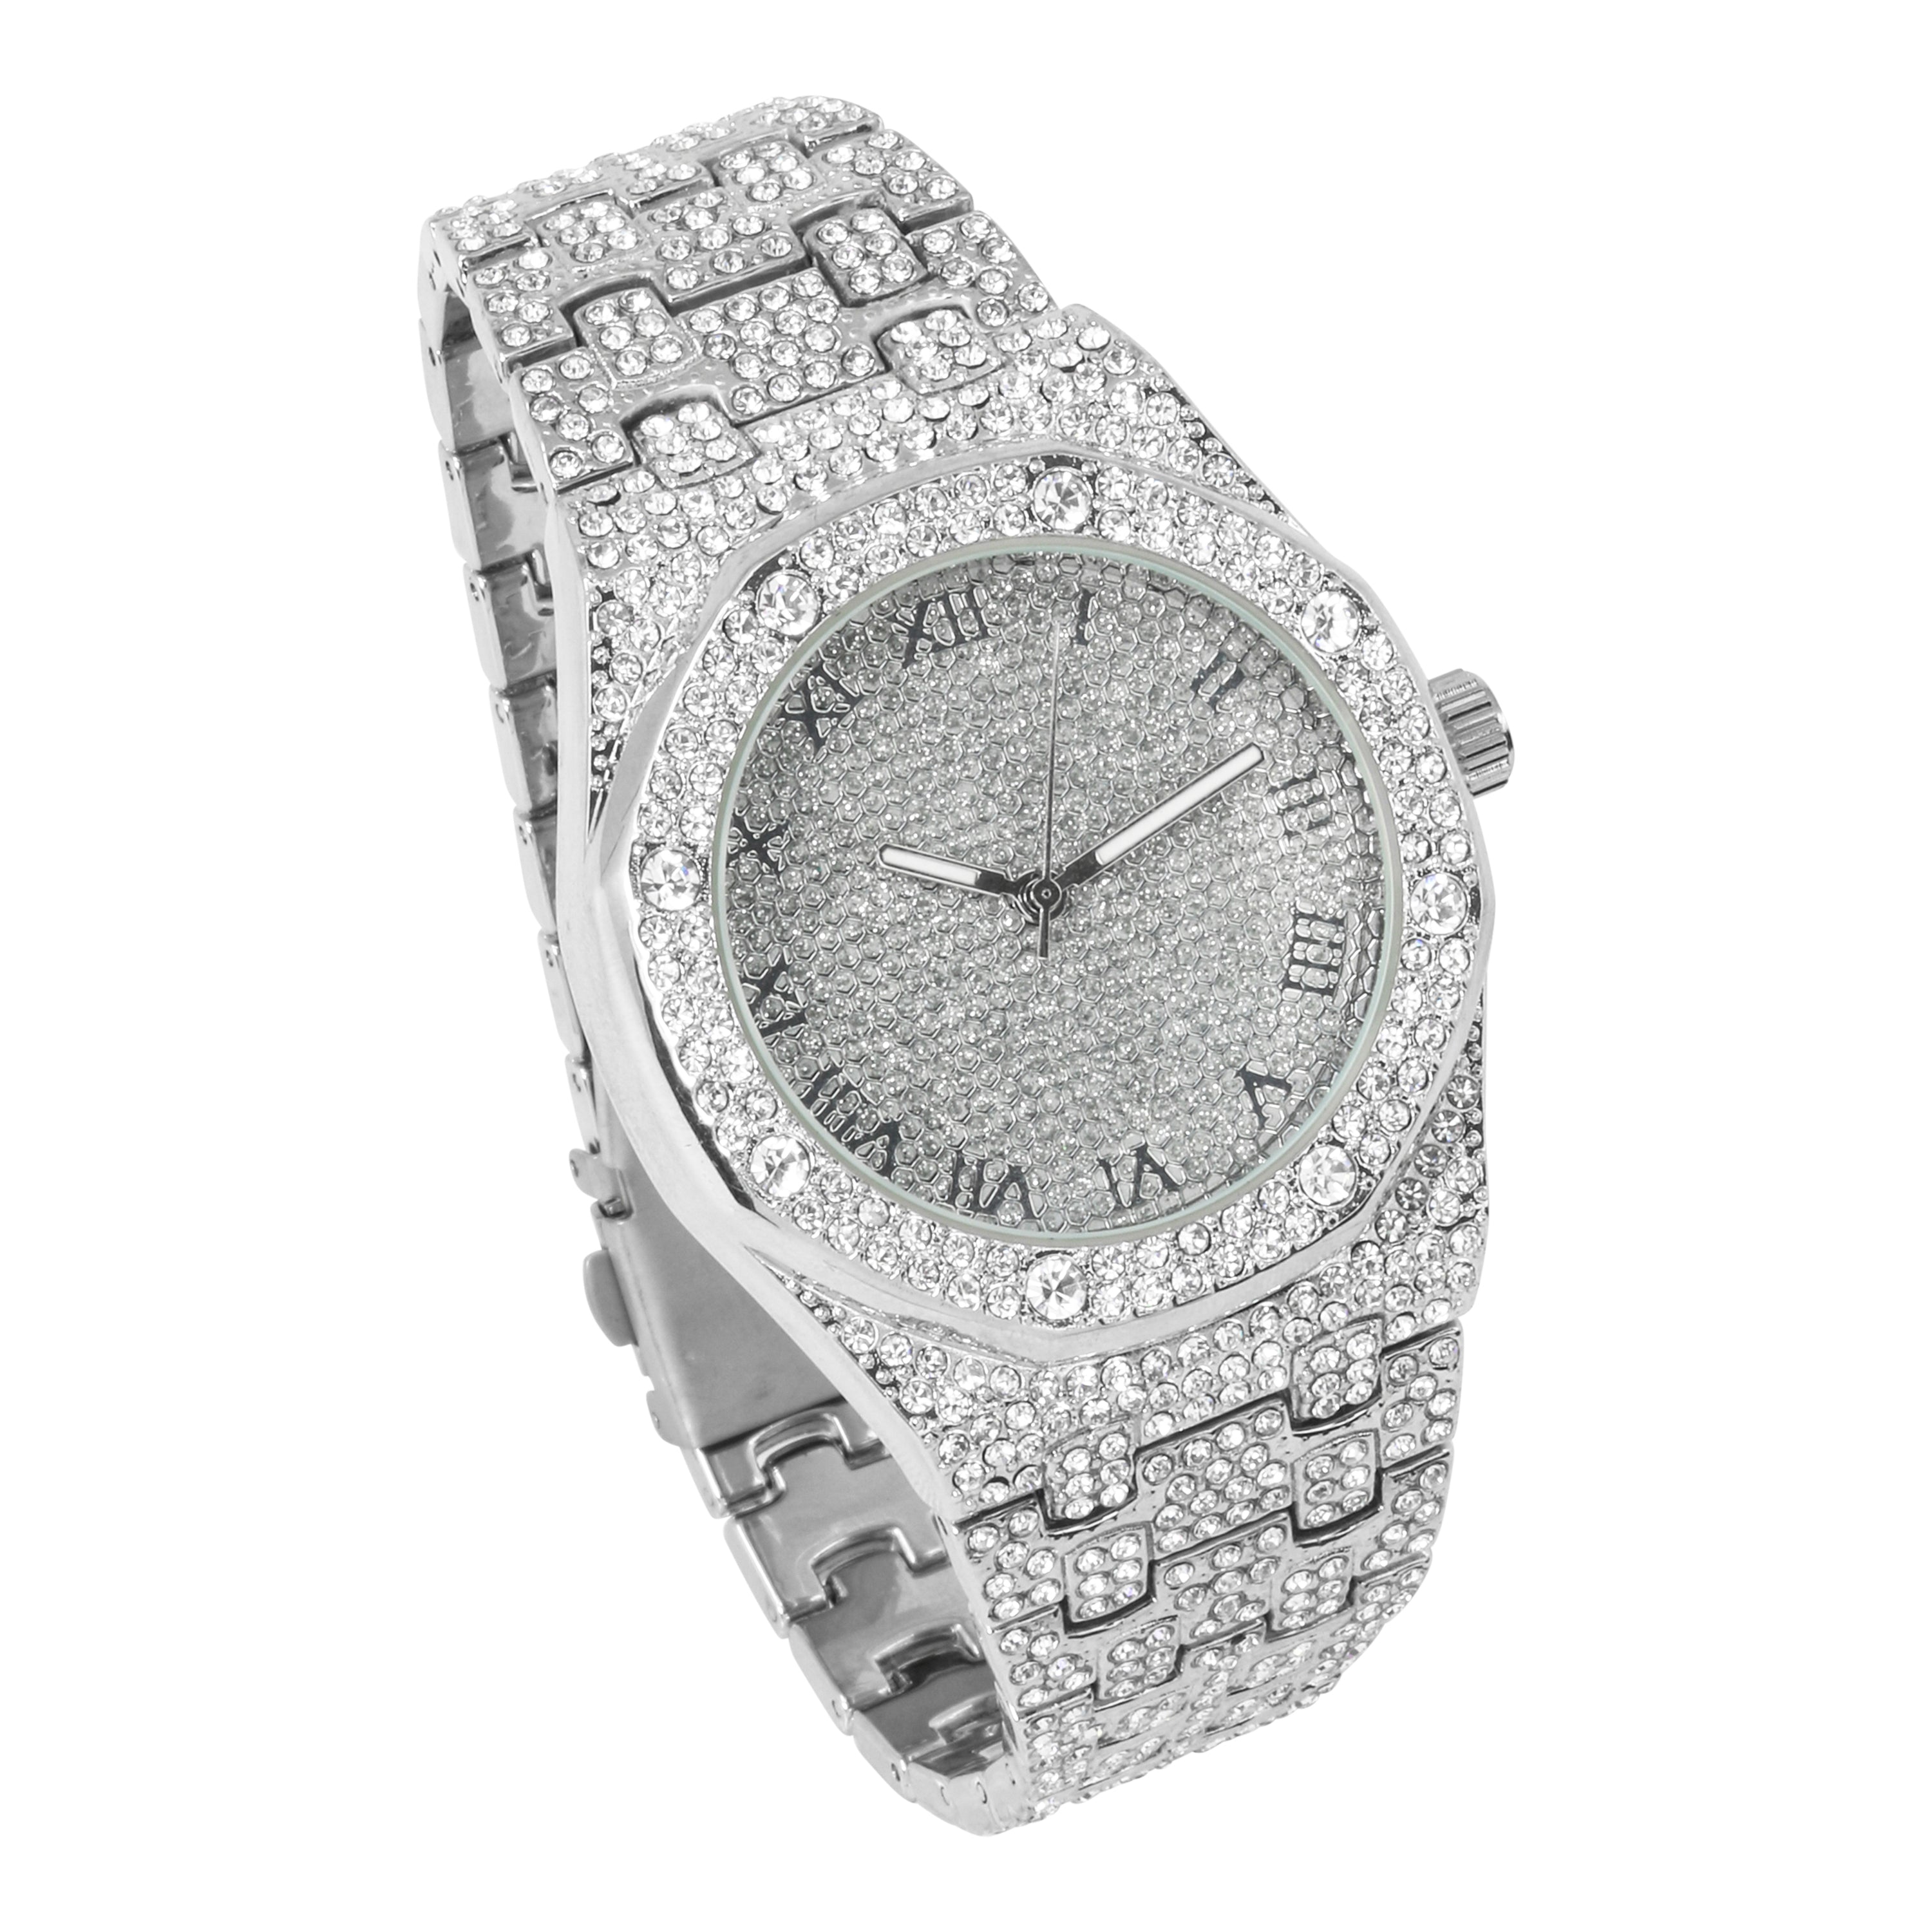 Men's 40mm Silver Octagon Bezel - "Fully Iced Out Watch"